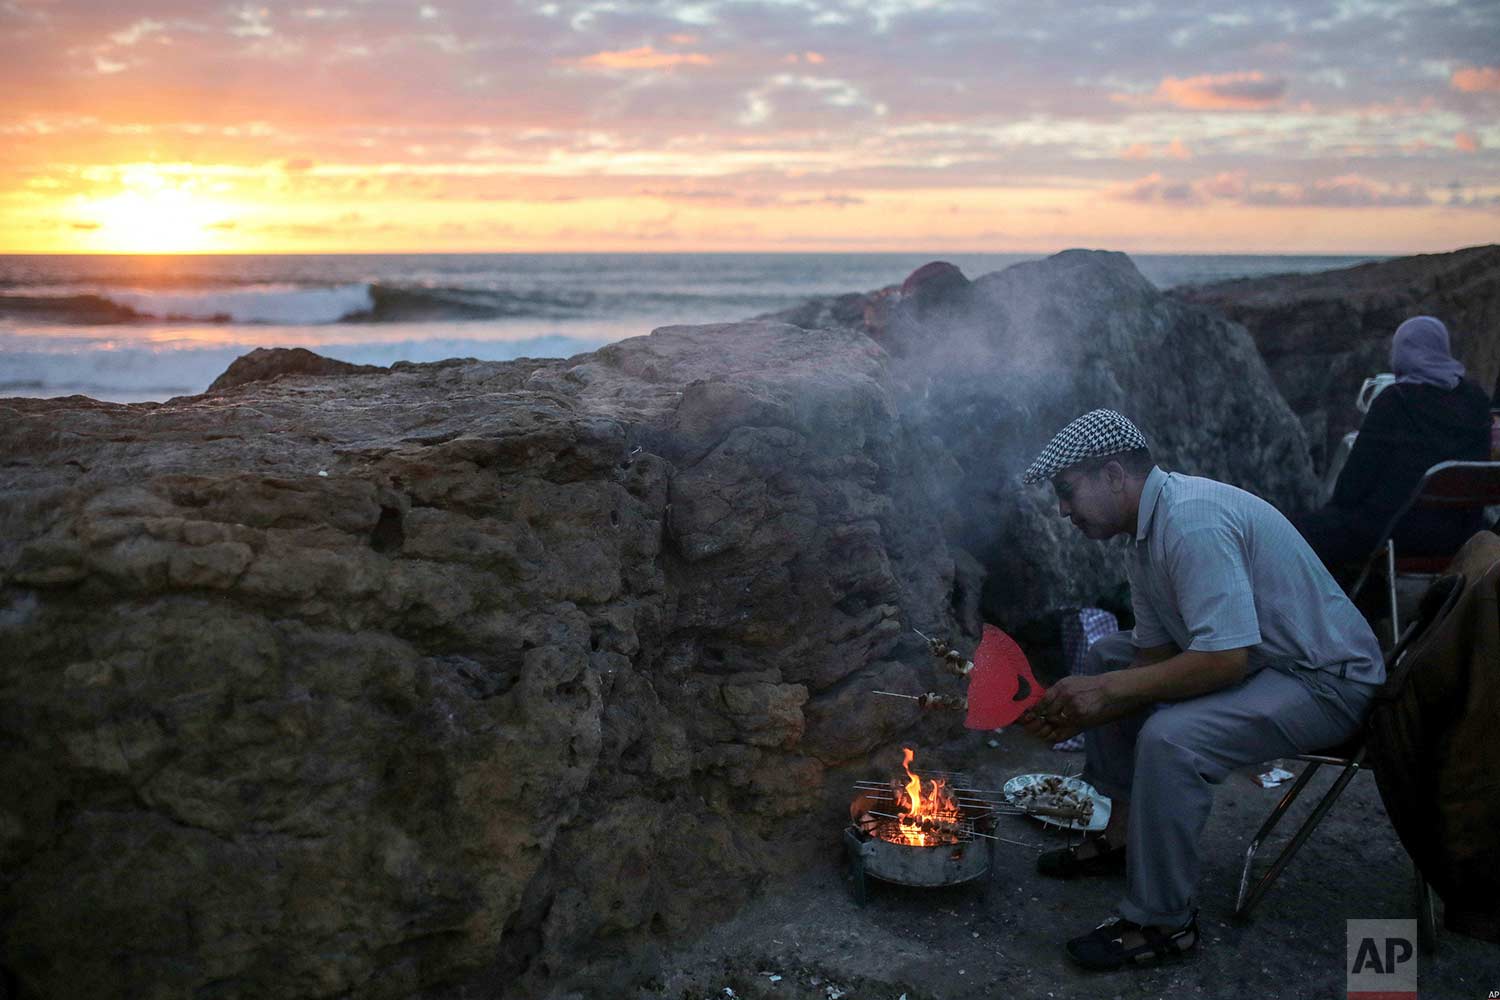  A man grills meat for his family on the beach to break their fast the holy month of Ramadan, in Rabat, Morocco, Saturday, June 9, 2018. (AP Photo/Mosa'ab Elshamy) 